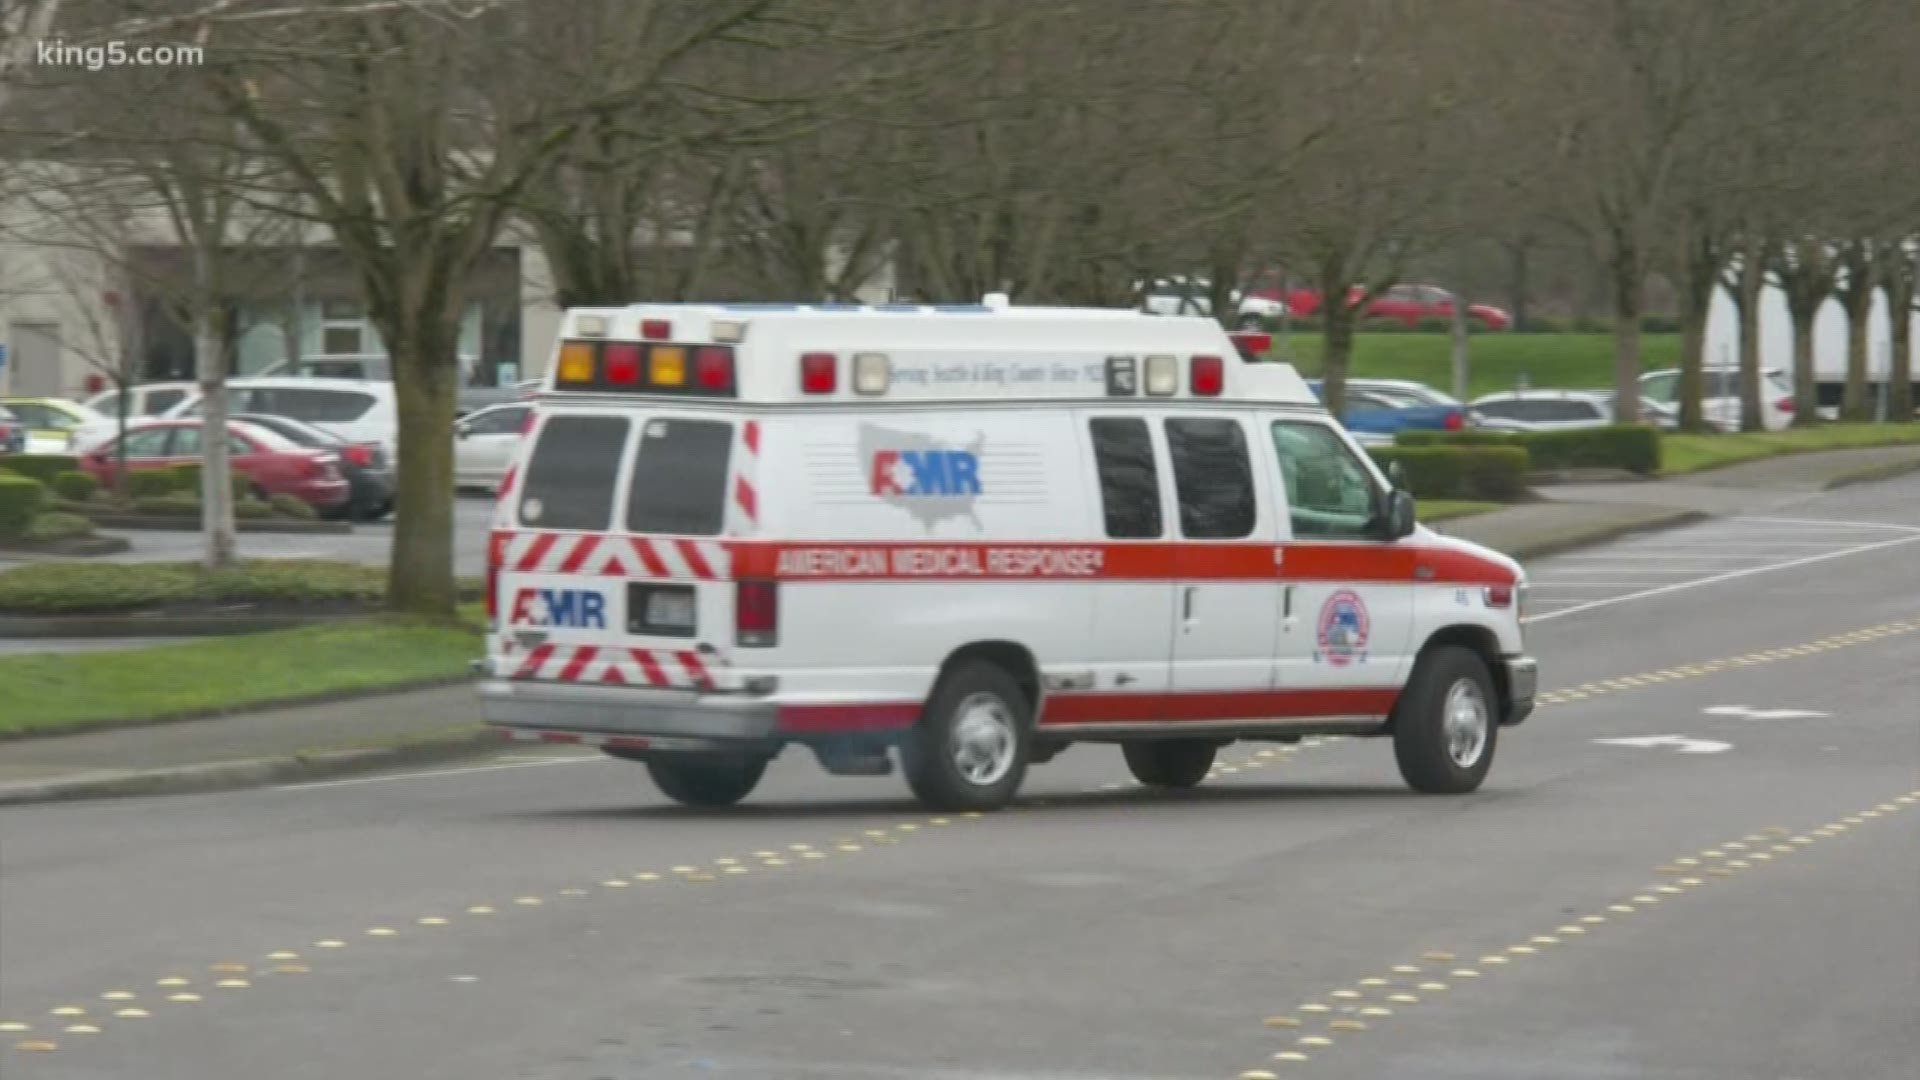 EMTs who work for AMR have expressed outrage and frustration after two EMTs transported a patient with possible novel coronavirus but weren’t warned of the danger.